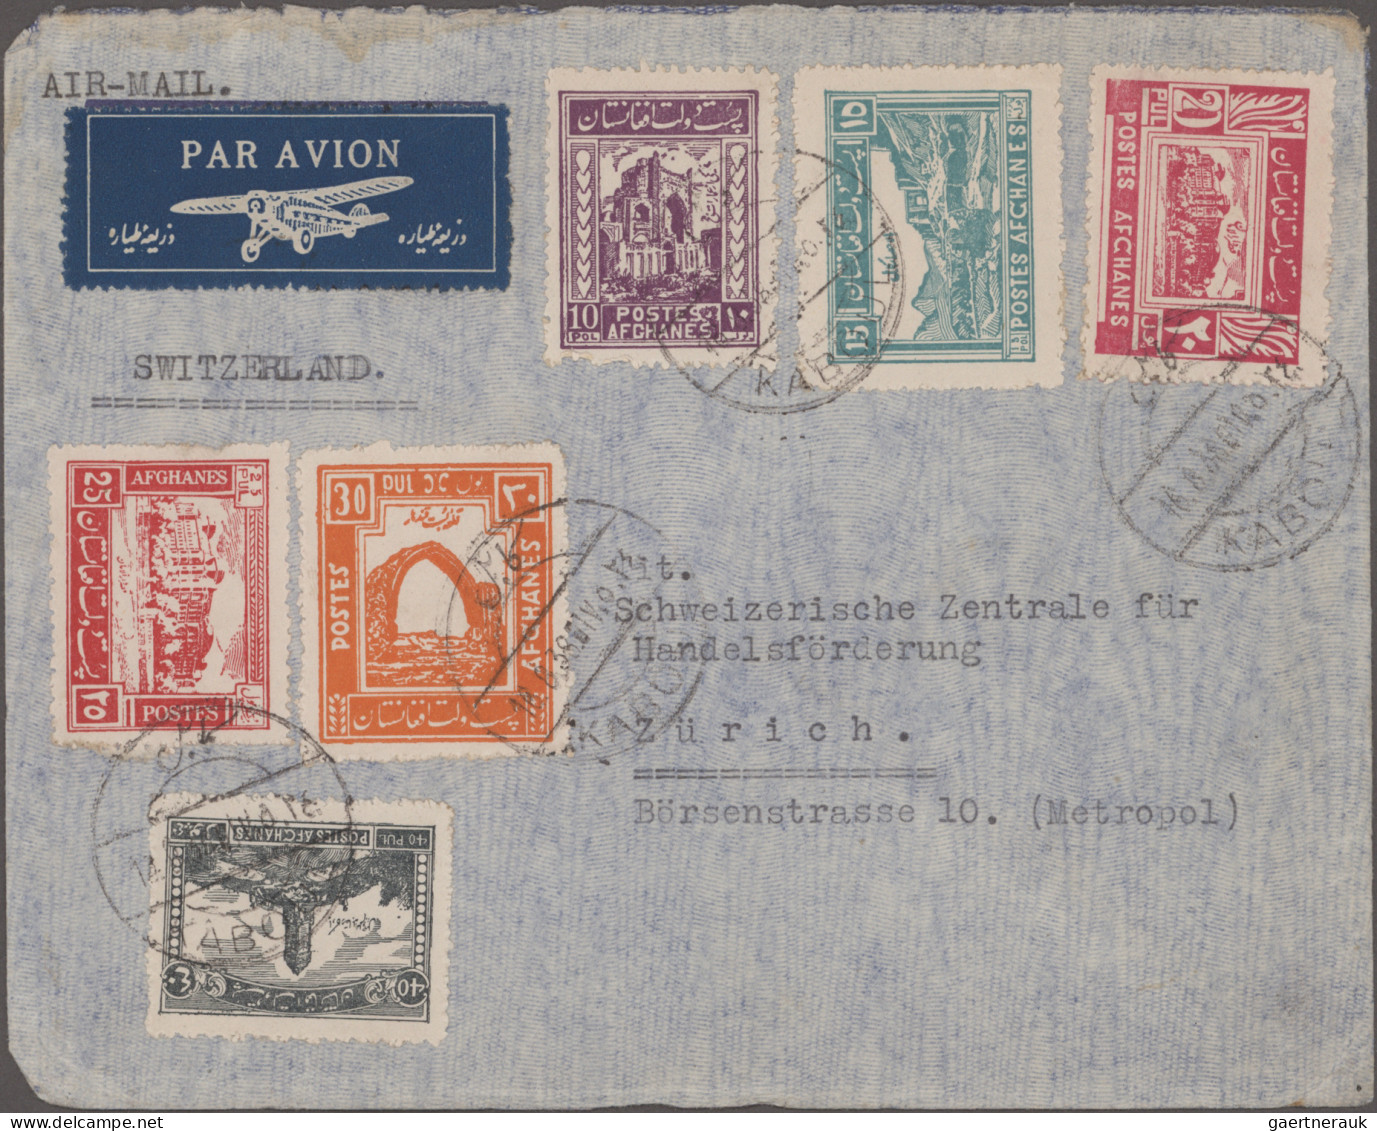 Afghanistan: 1927/1956 AIR MAIL: 18 interesting covers, postcards, picture postc